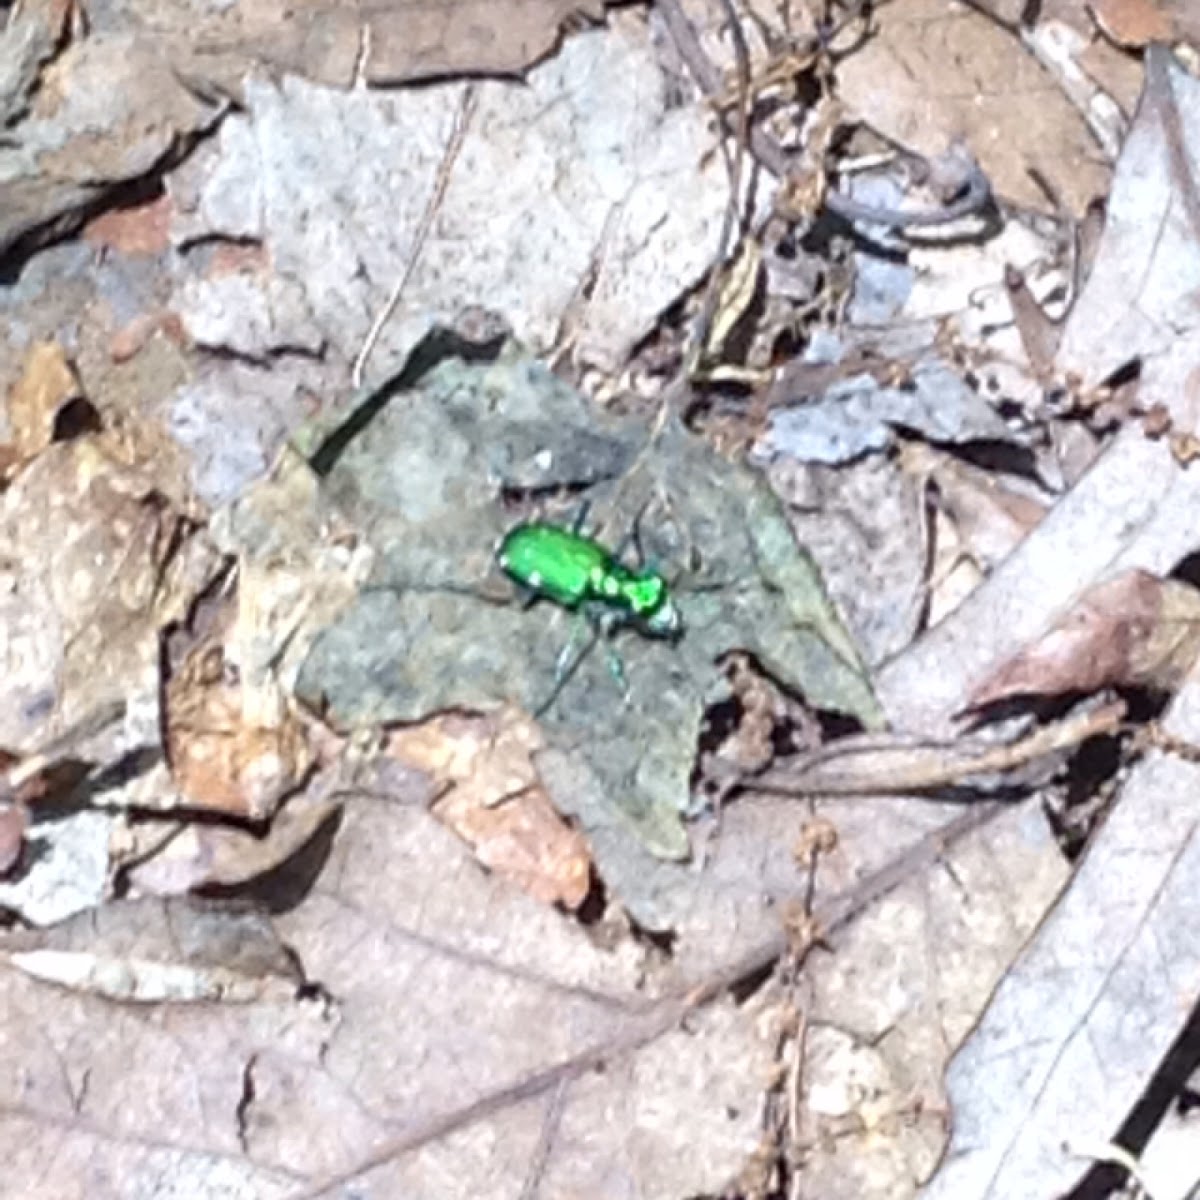 Six spotted tiger beetle.